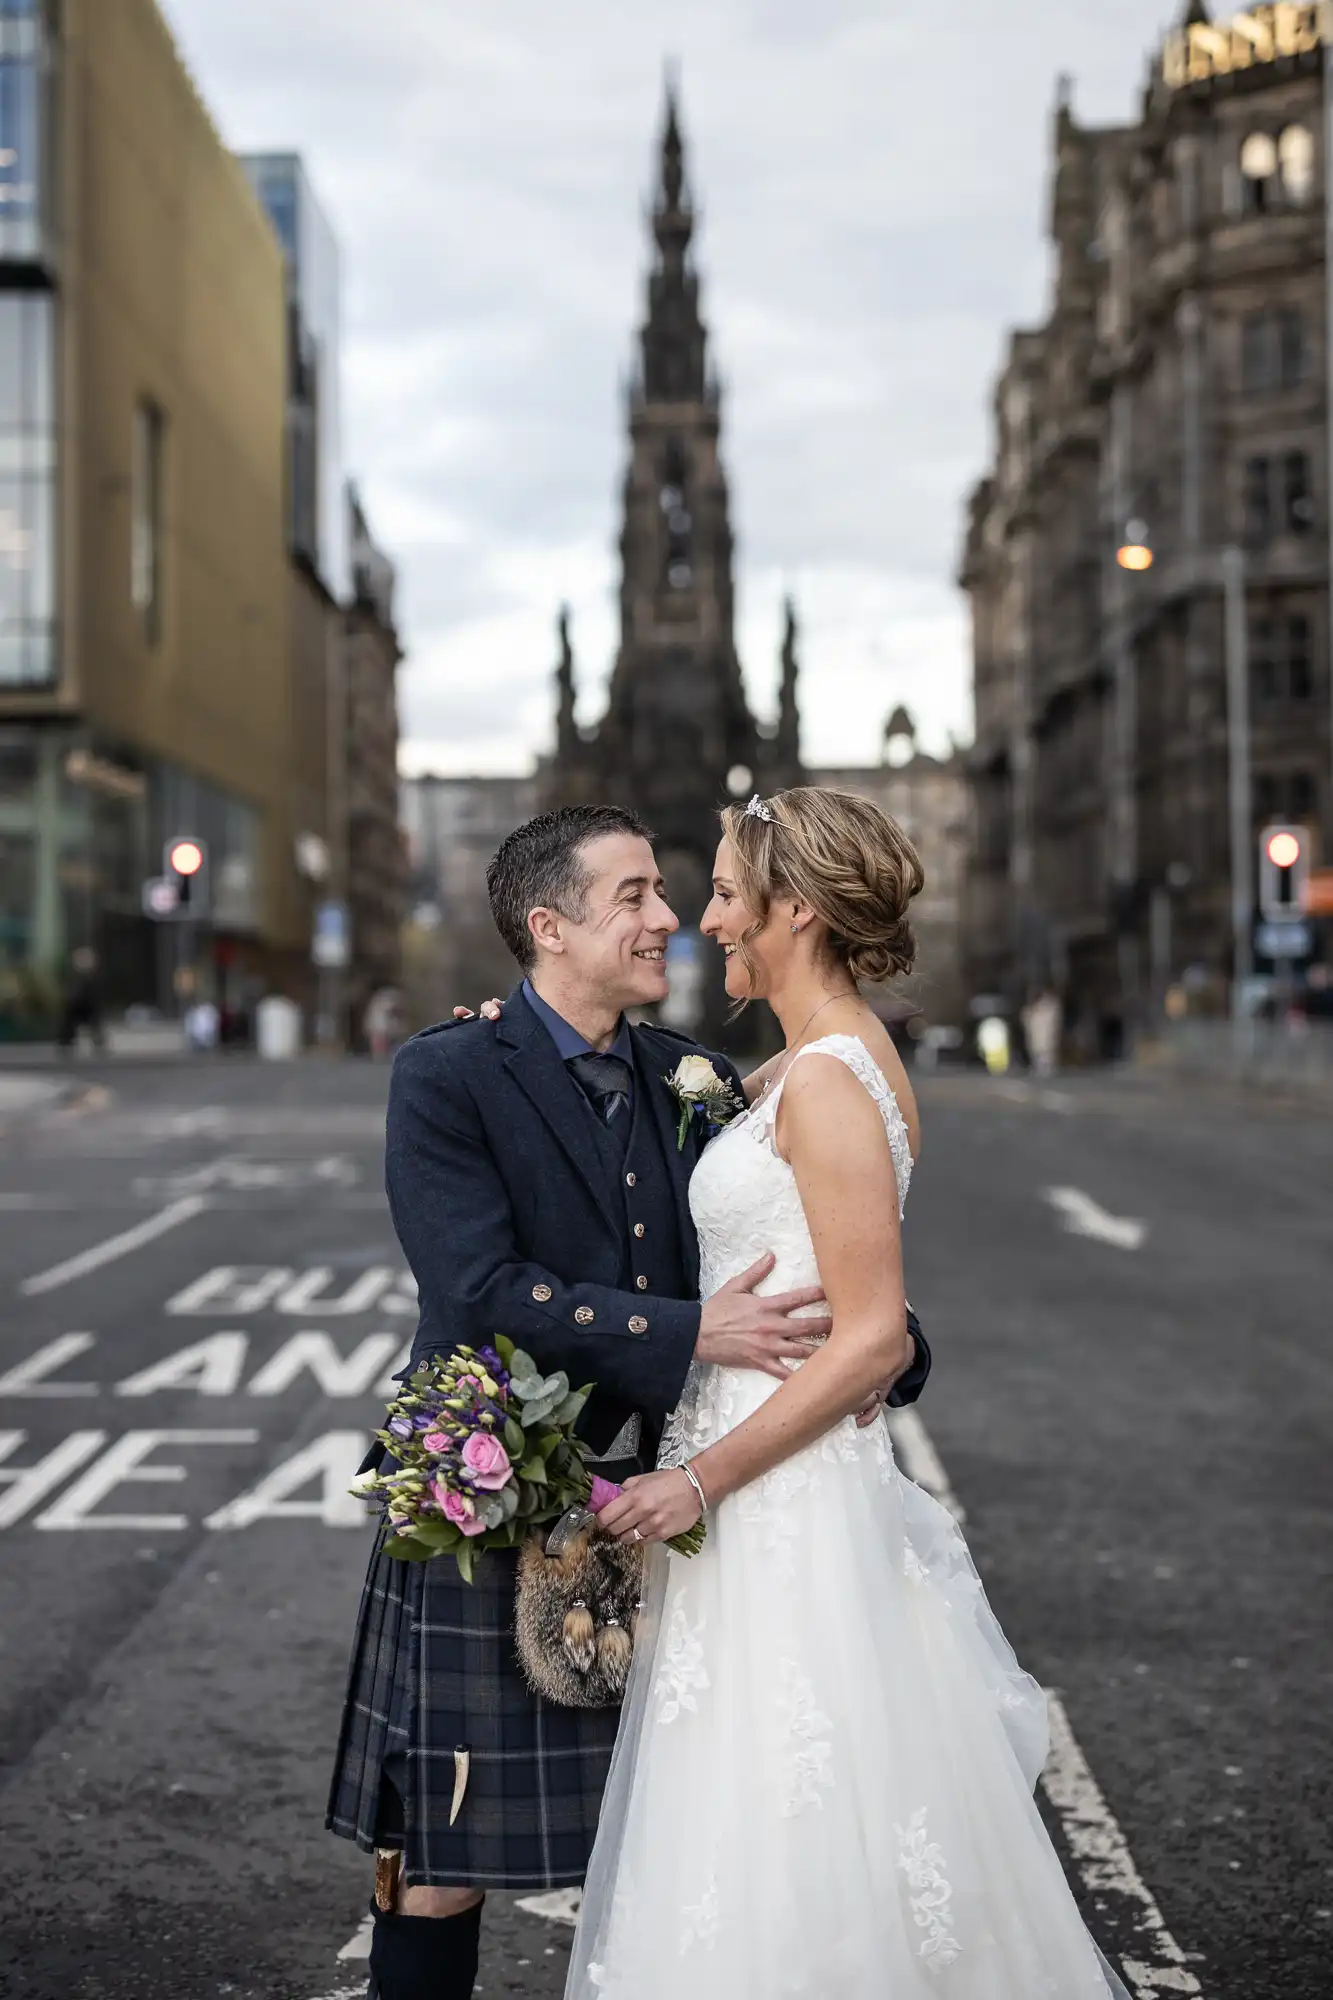 A couple wearing wedding attire, with the groom in a kilt and the bride in a white gown, stand embracing on a city street with historic buildings and a tall monument in the background.